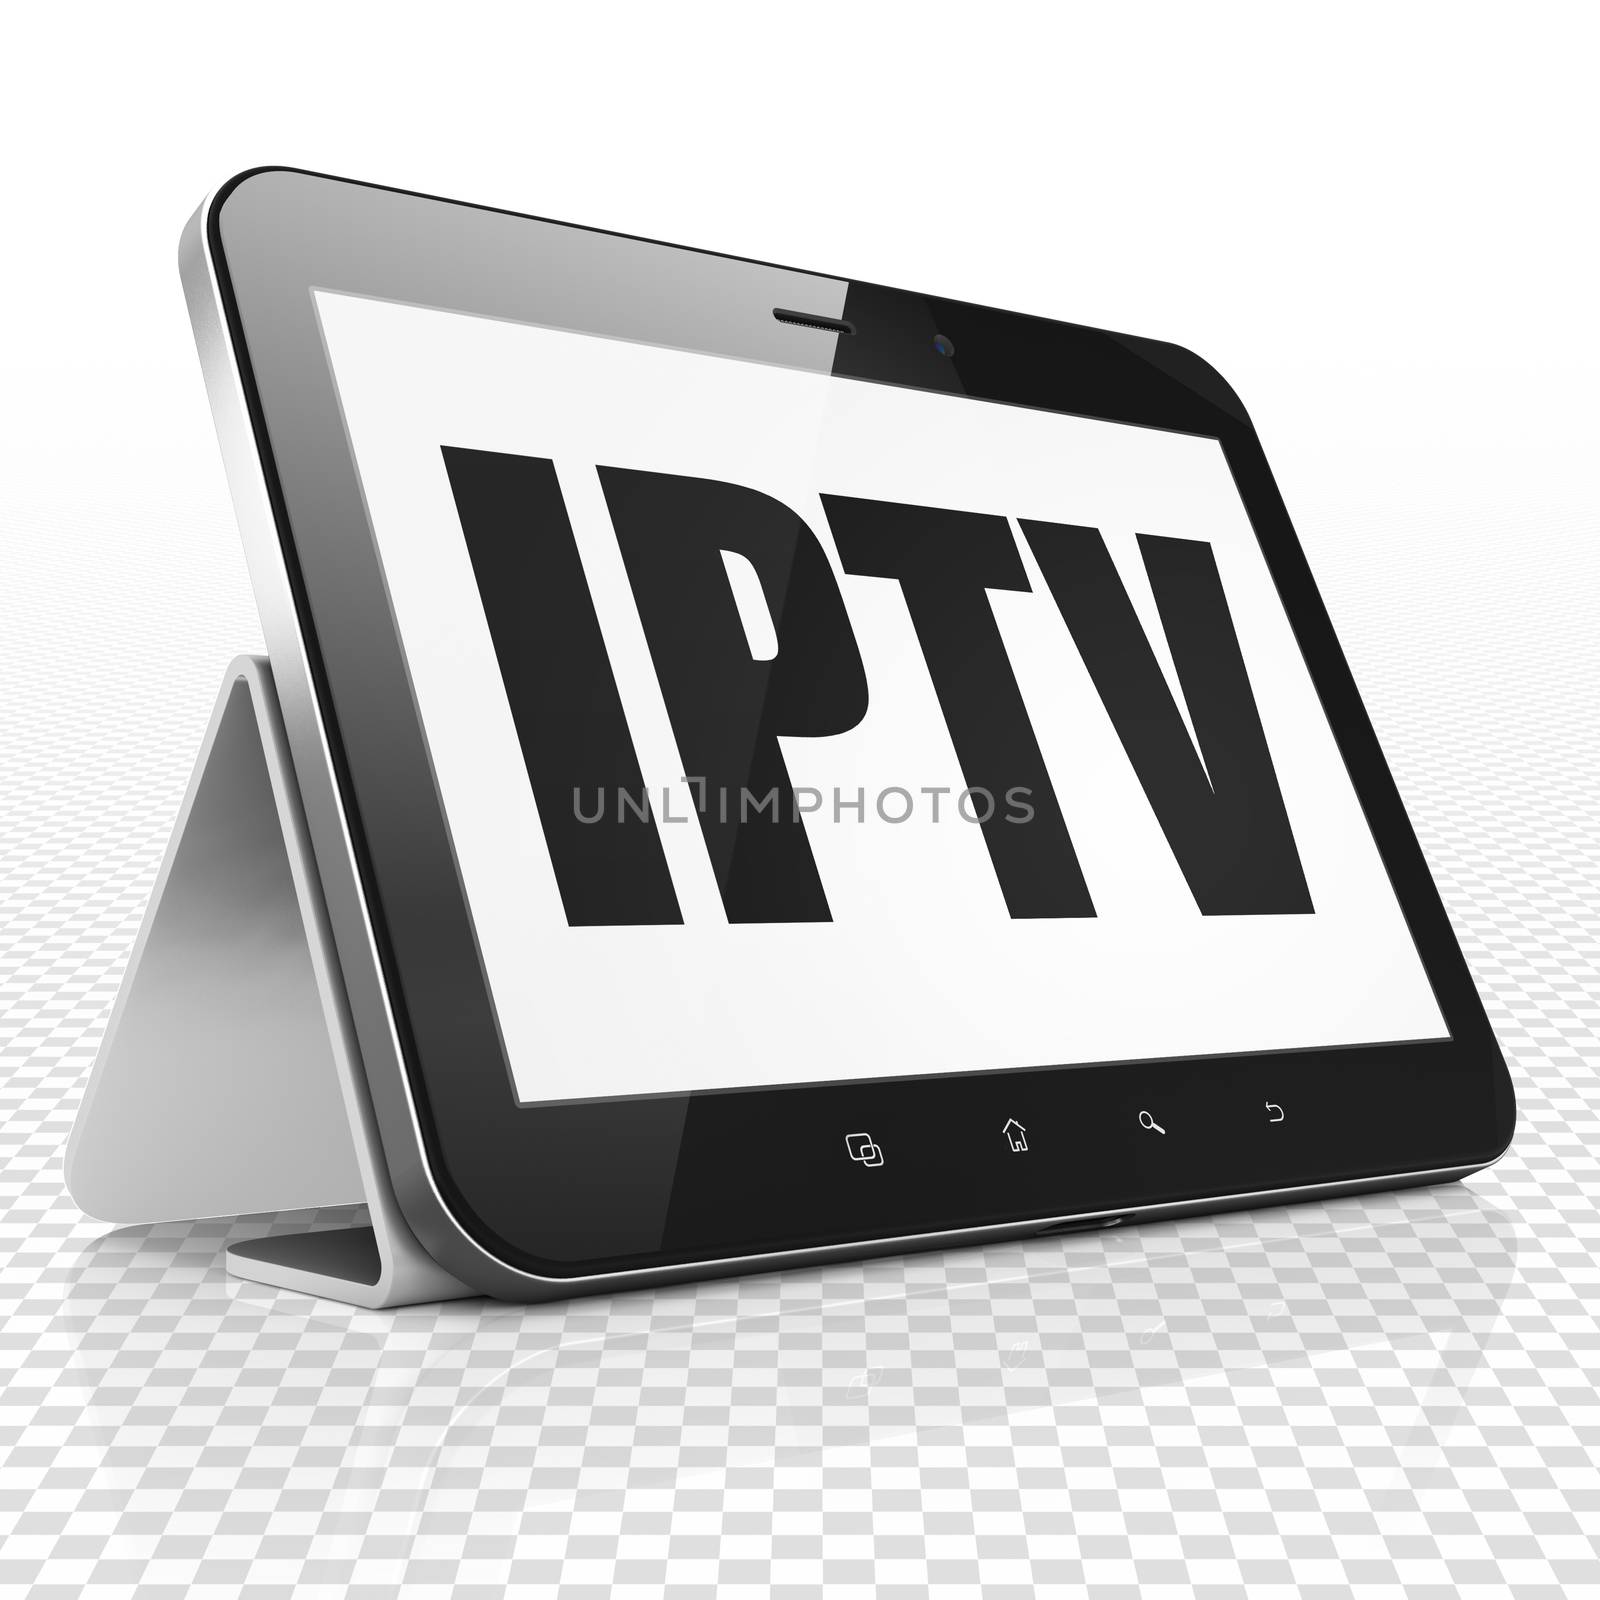 Web development concept: Tablet Computer with IPTV on display by maxkabakov